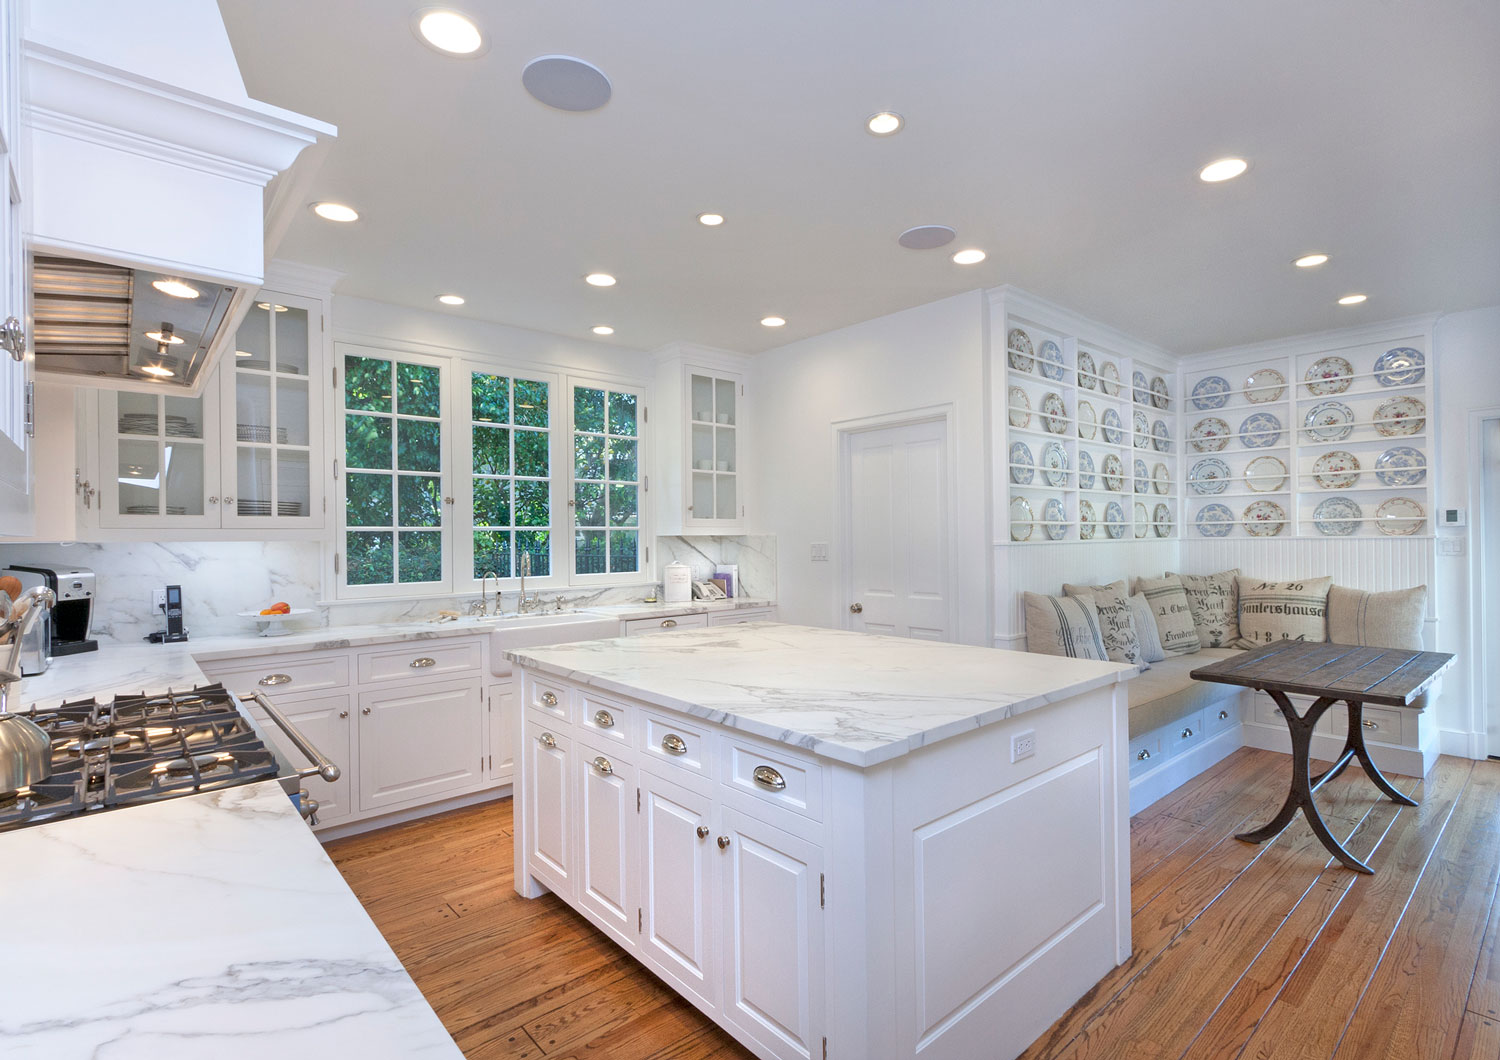 05-traditional-kitchen-marble-top-island-breakfast-nook-plate-collection-gary-drake-general-contractor.jpg